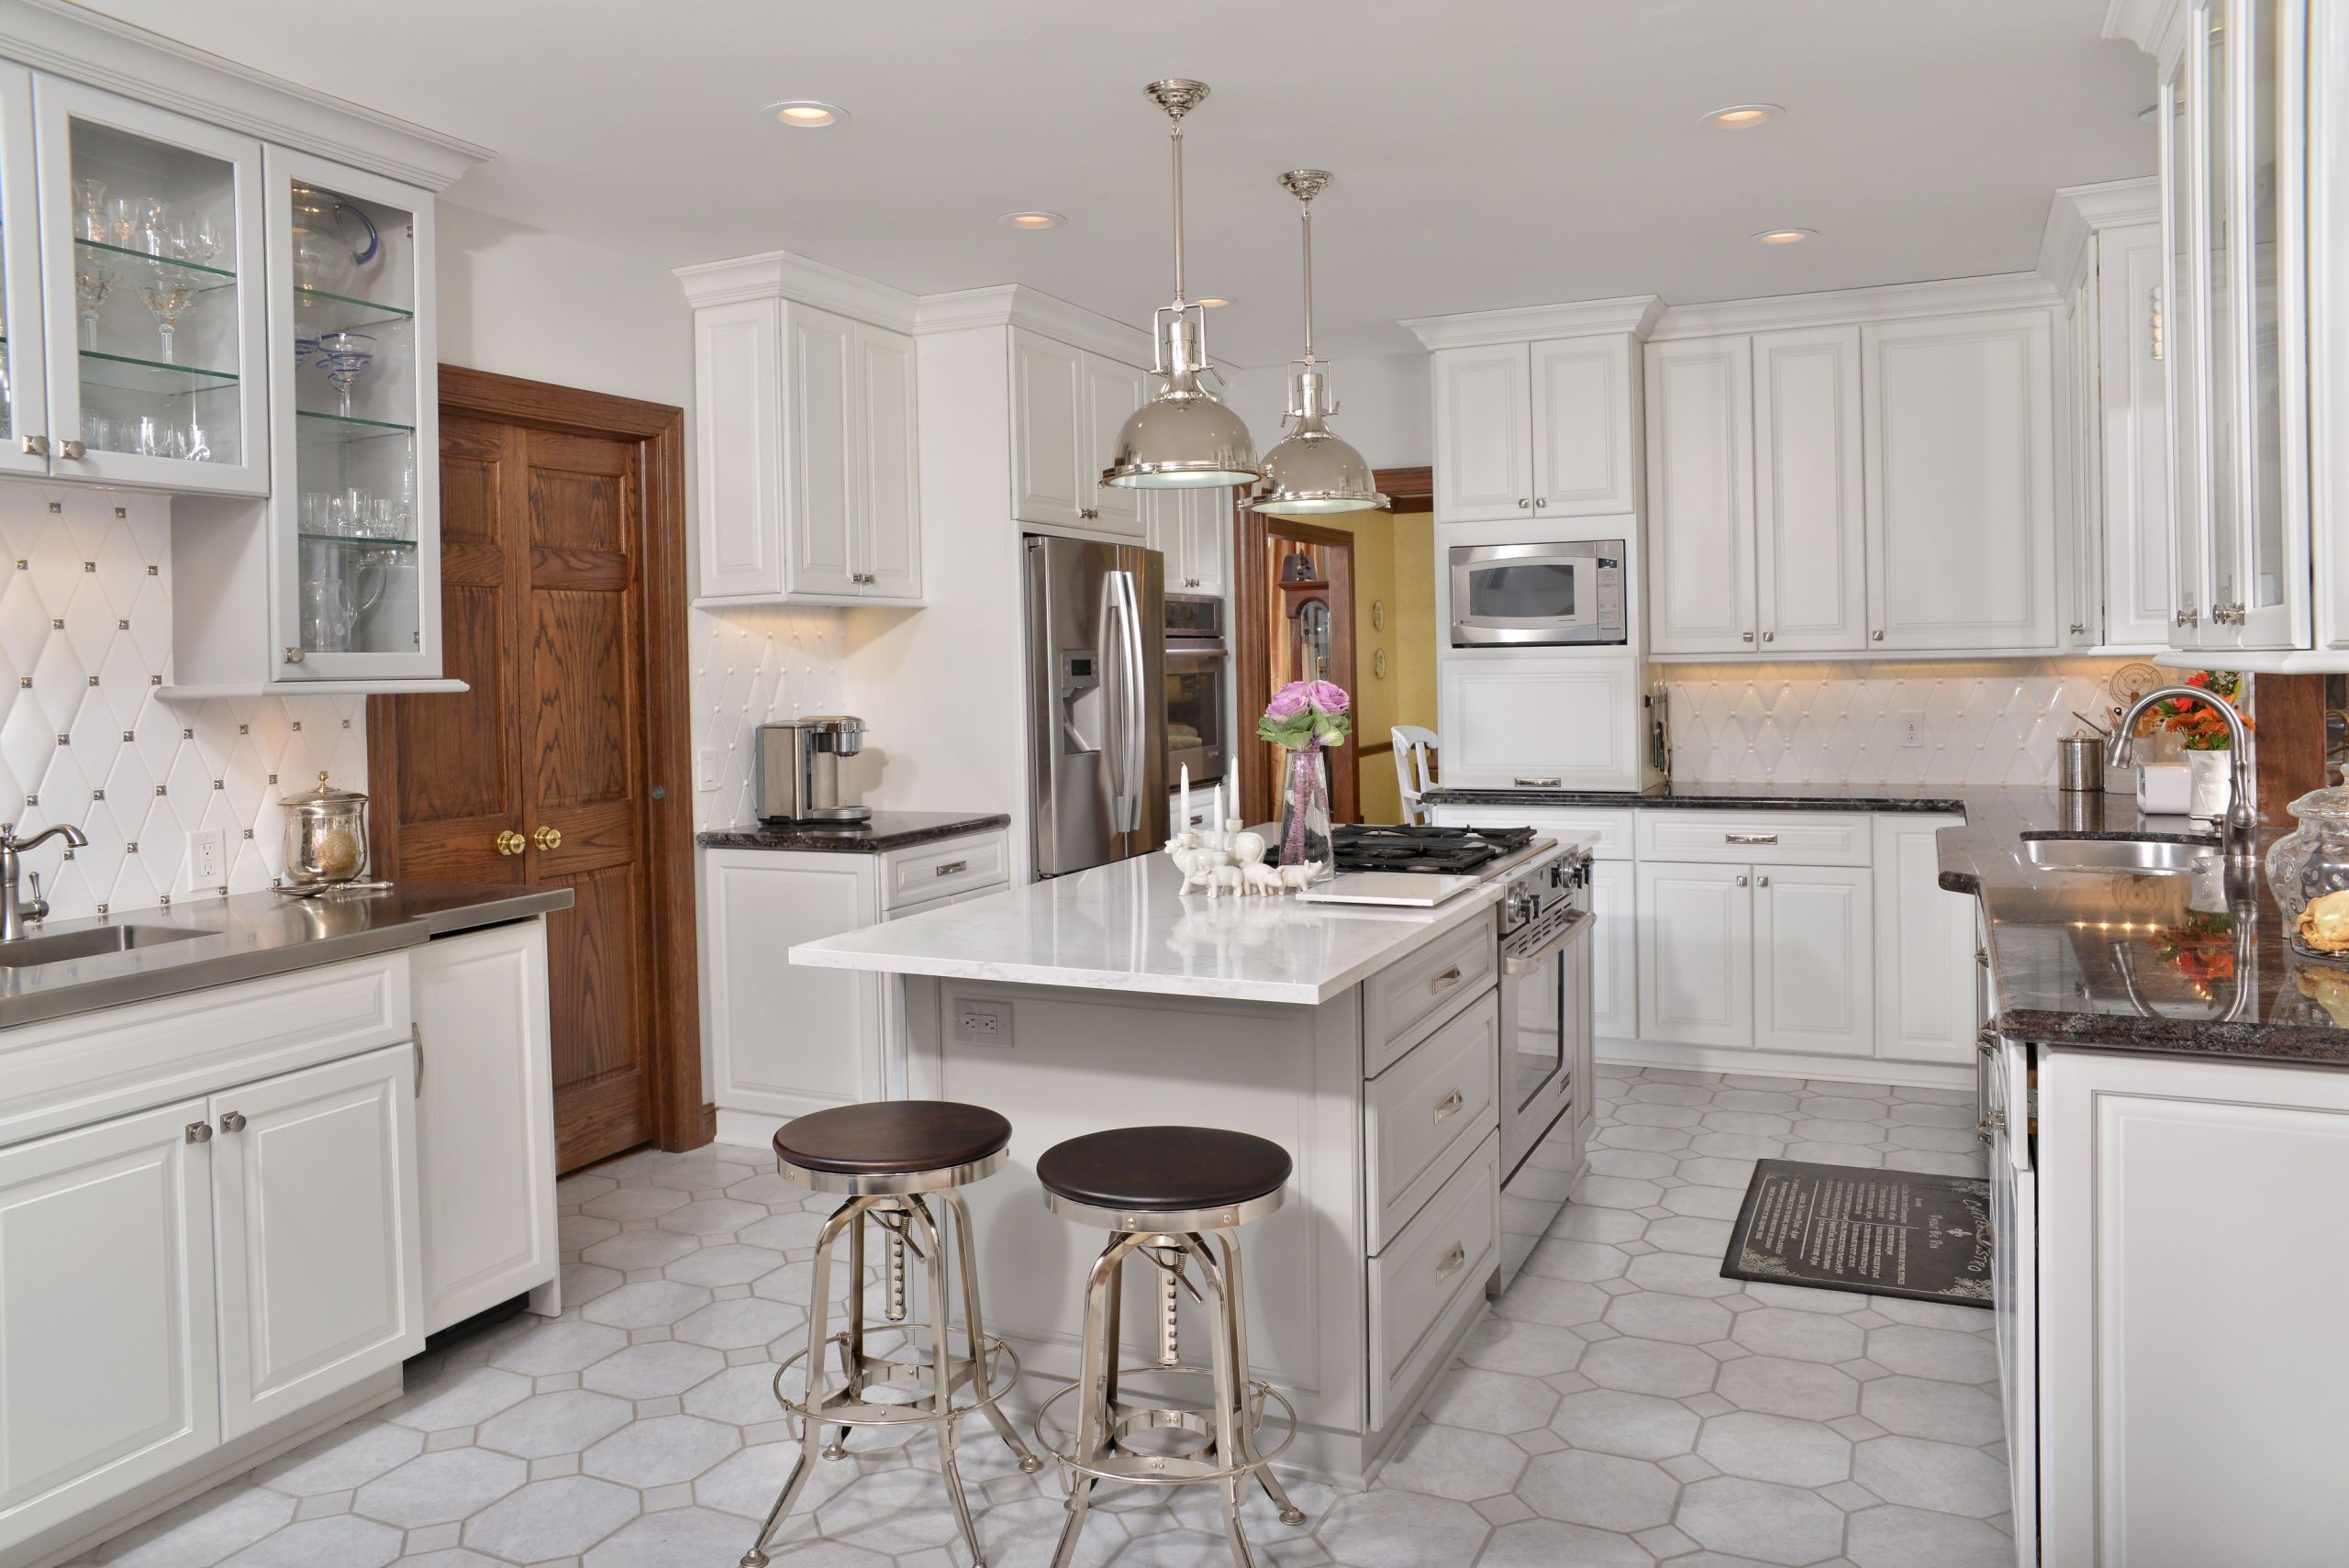 Kitchen Remodeling Cleveland Ohio
 Artistic Renovations